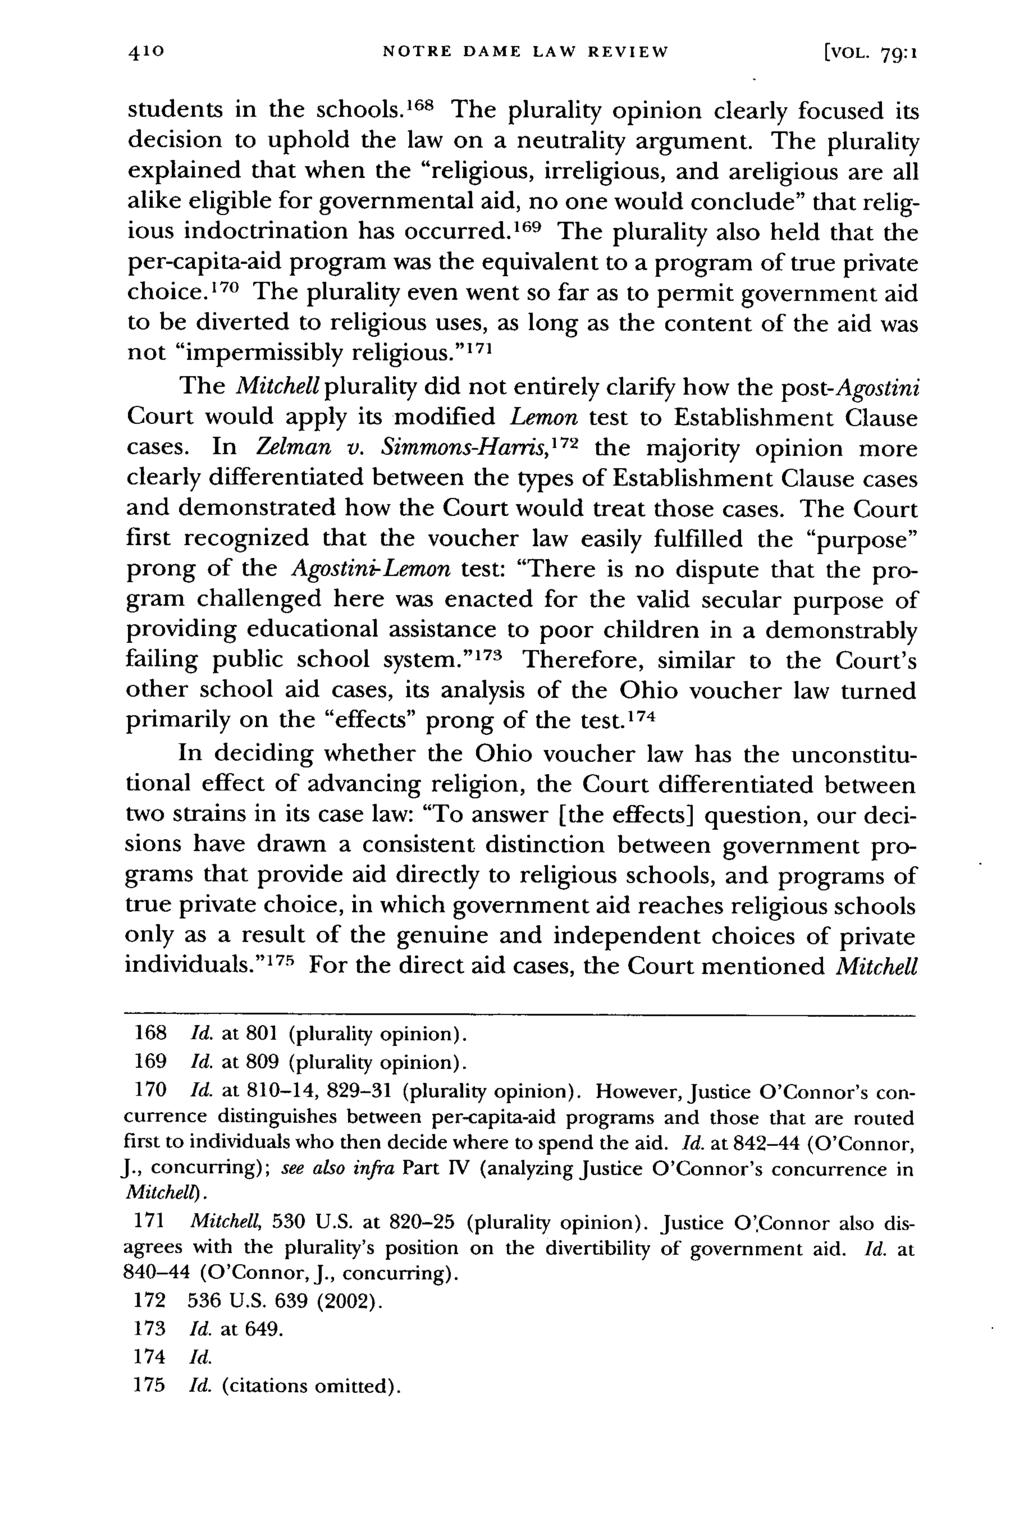 NOTRE DAME LAW REVIEW [VOL. 79: 1 students in the schools. 168 The plurality opinion clearly focused its decision to uphold the law on a neutrality argument.